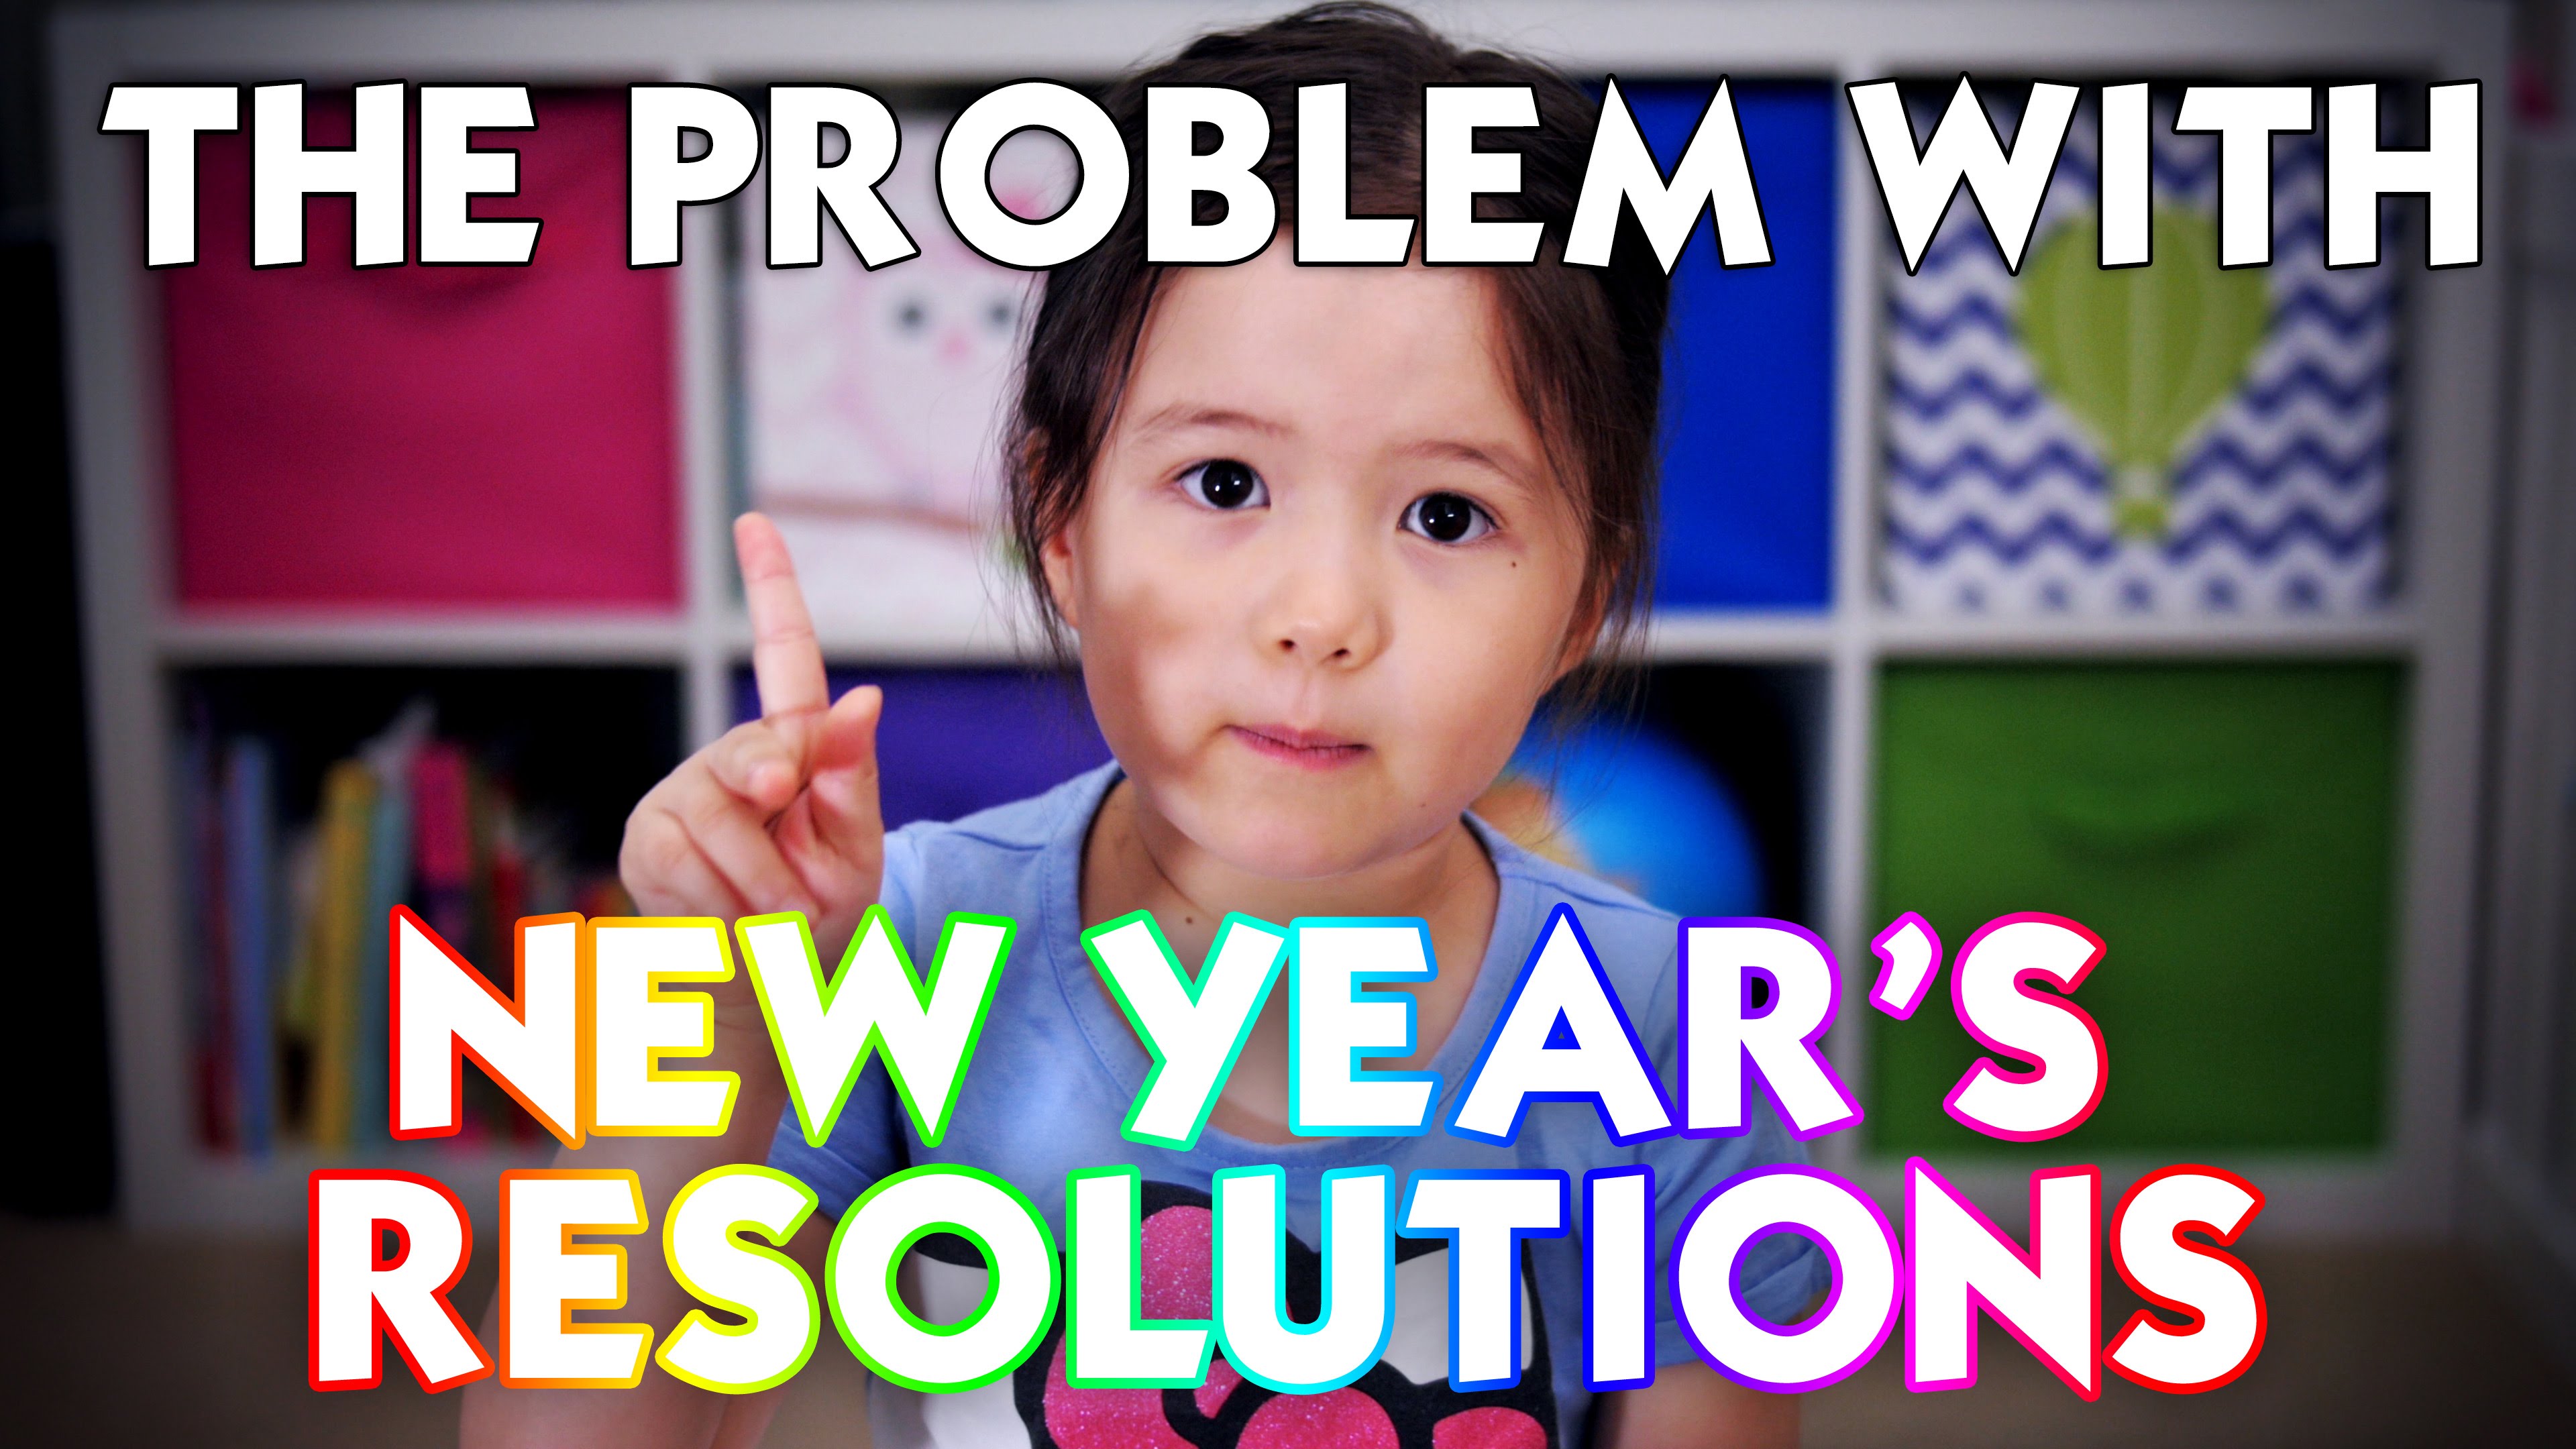 This 4-Year Old Girl’s Explanation On the Problem with New Year’s Resolutions Is Everything You Need